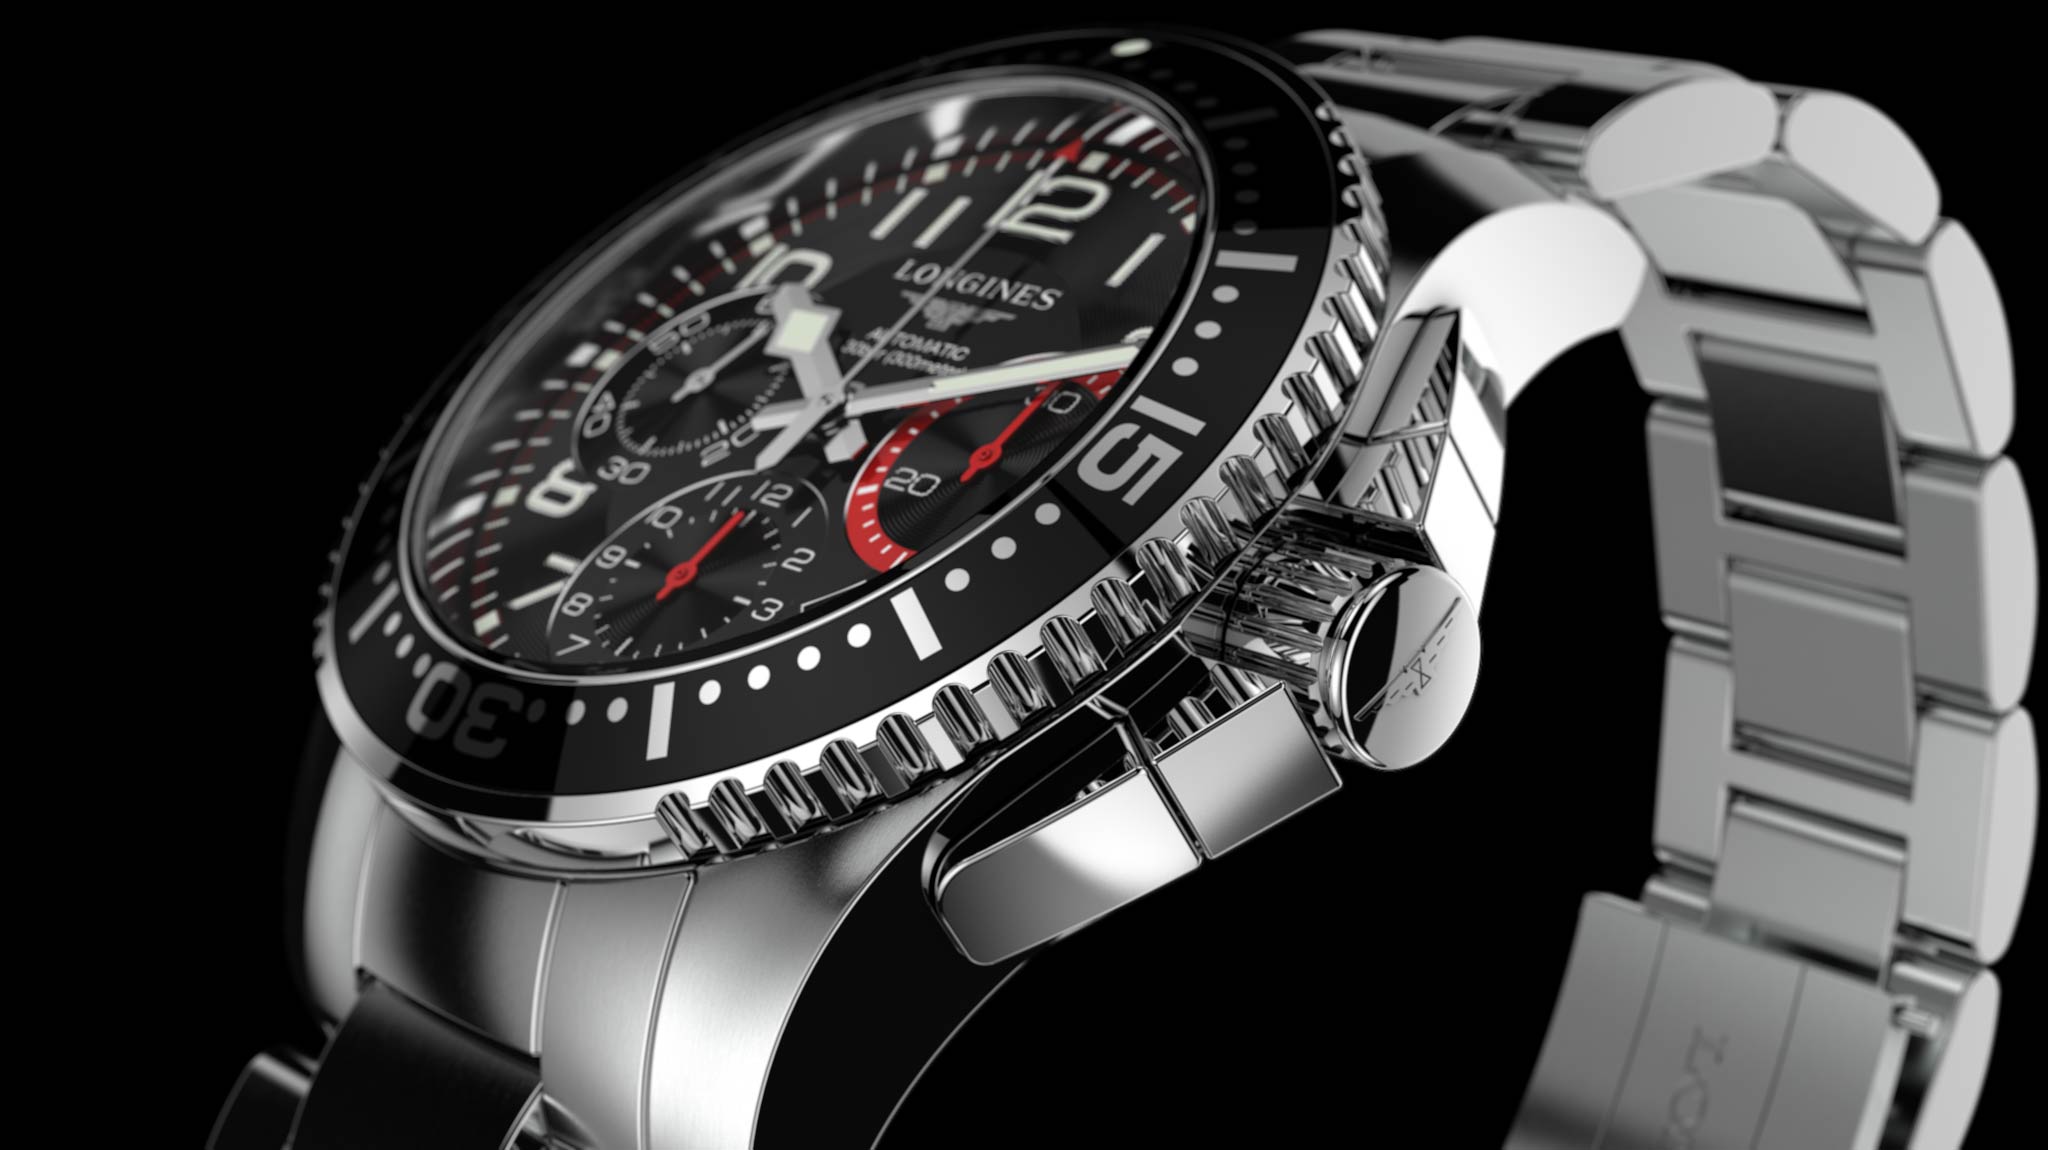 3DVISION NYVALIS 2014 LONGINES HydroConquest 02